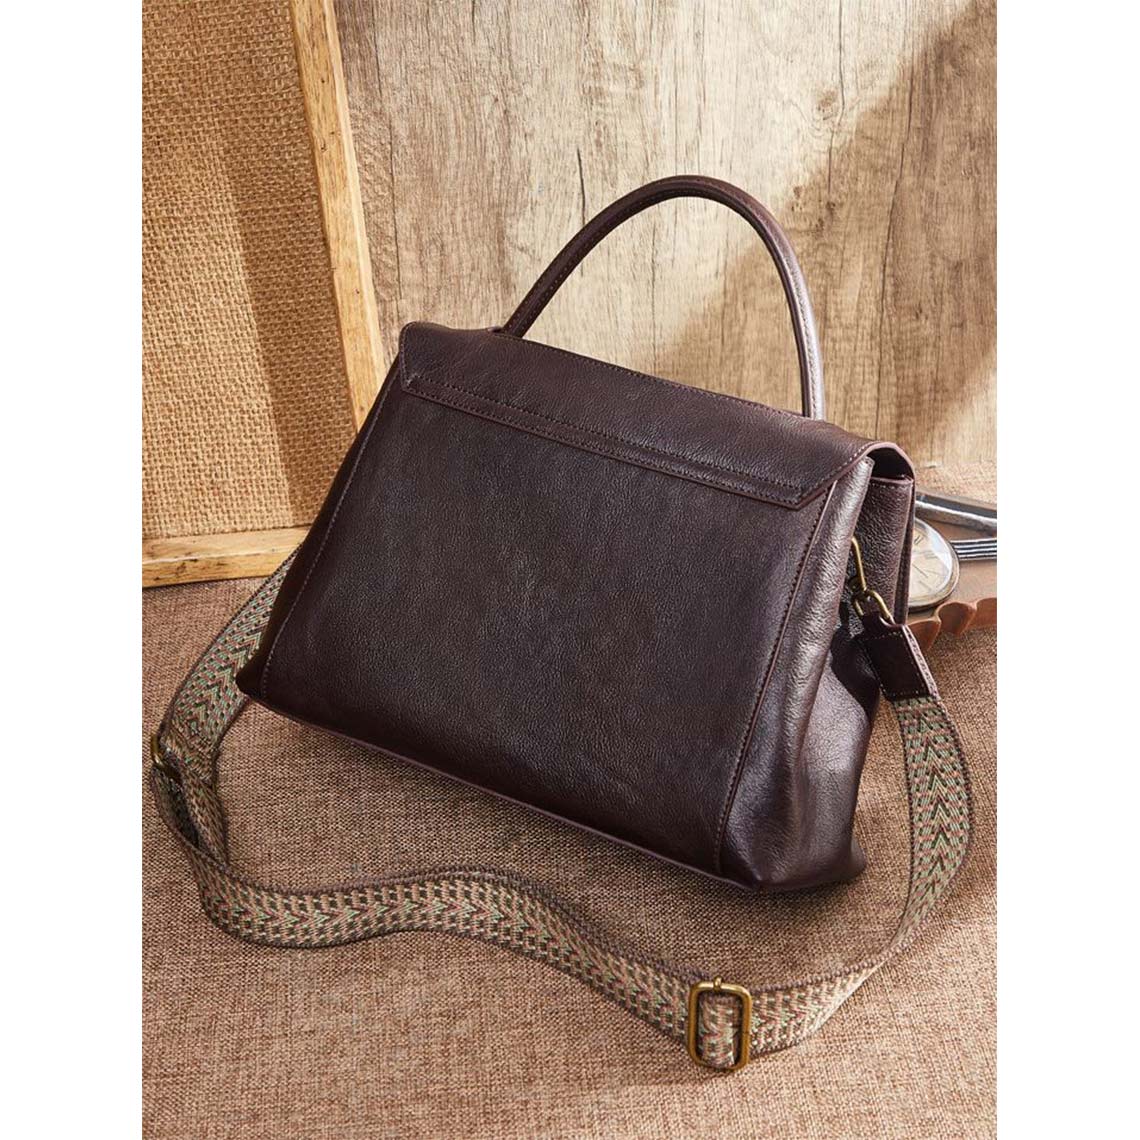 Vegetable Tanned Leather Distressed Top Handle Bag